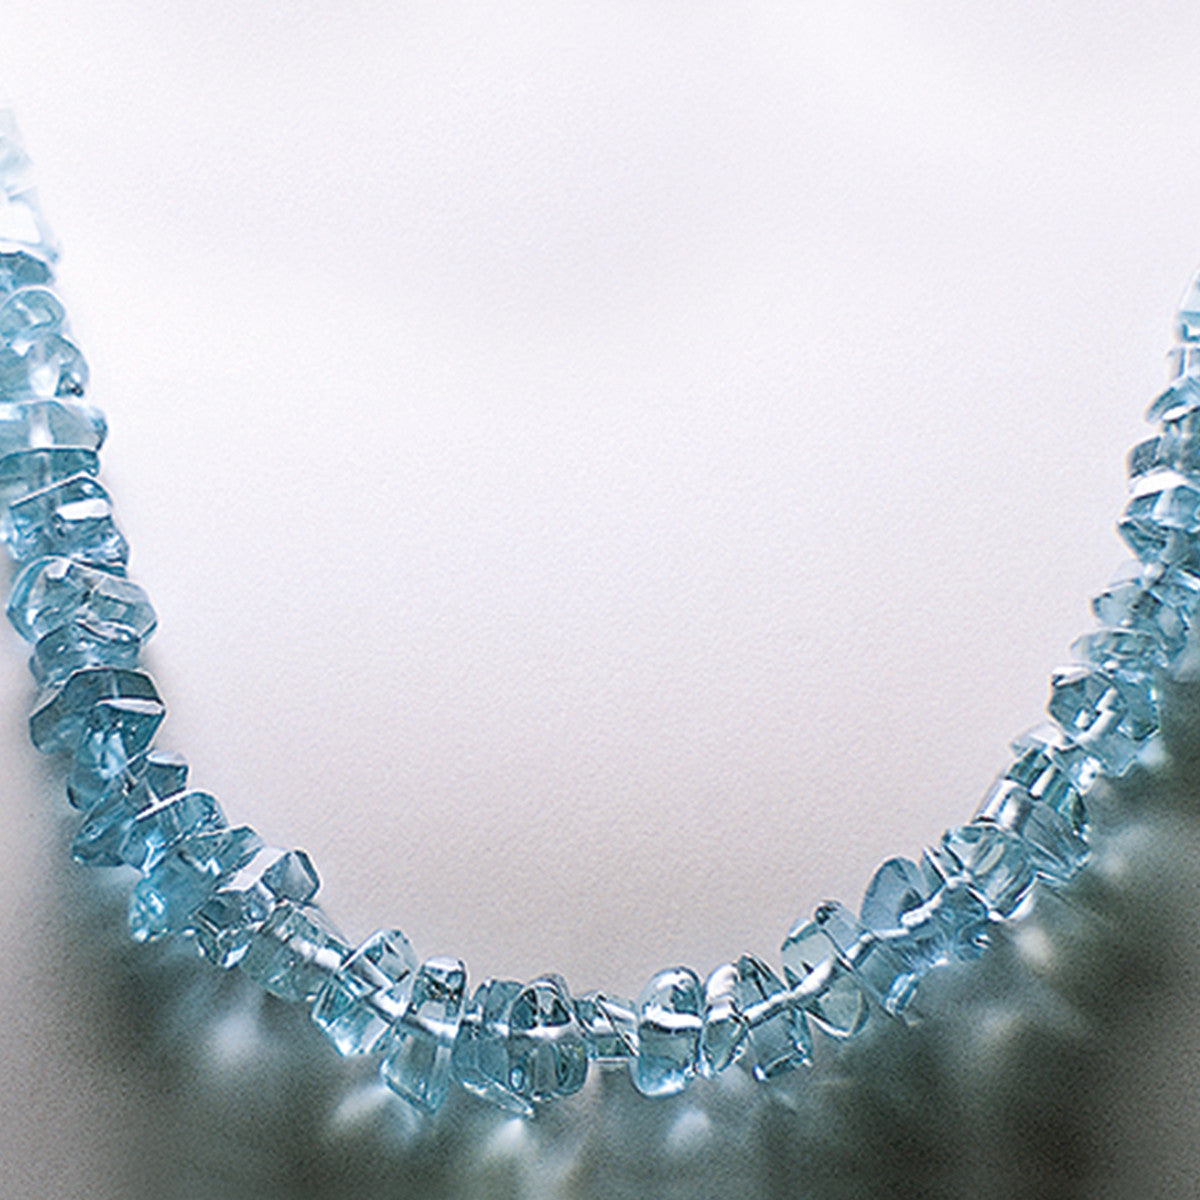 Crystal healing Aquamarine necklace known for heightening your awareness of truth